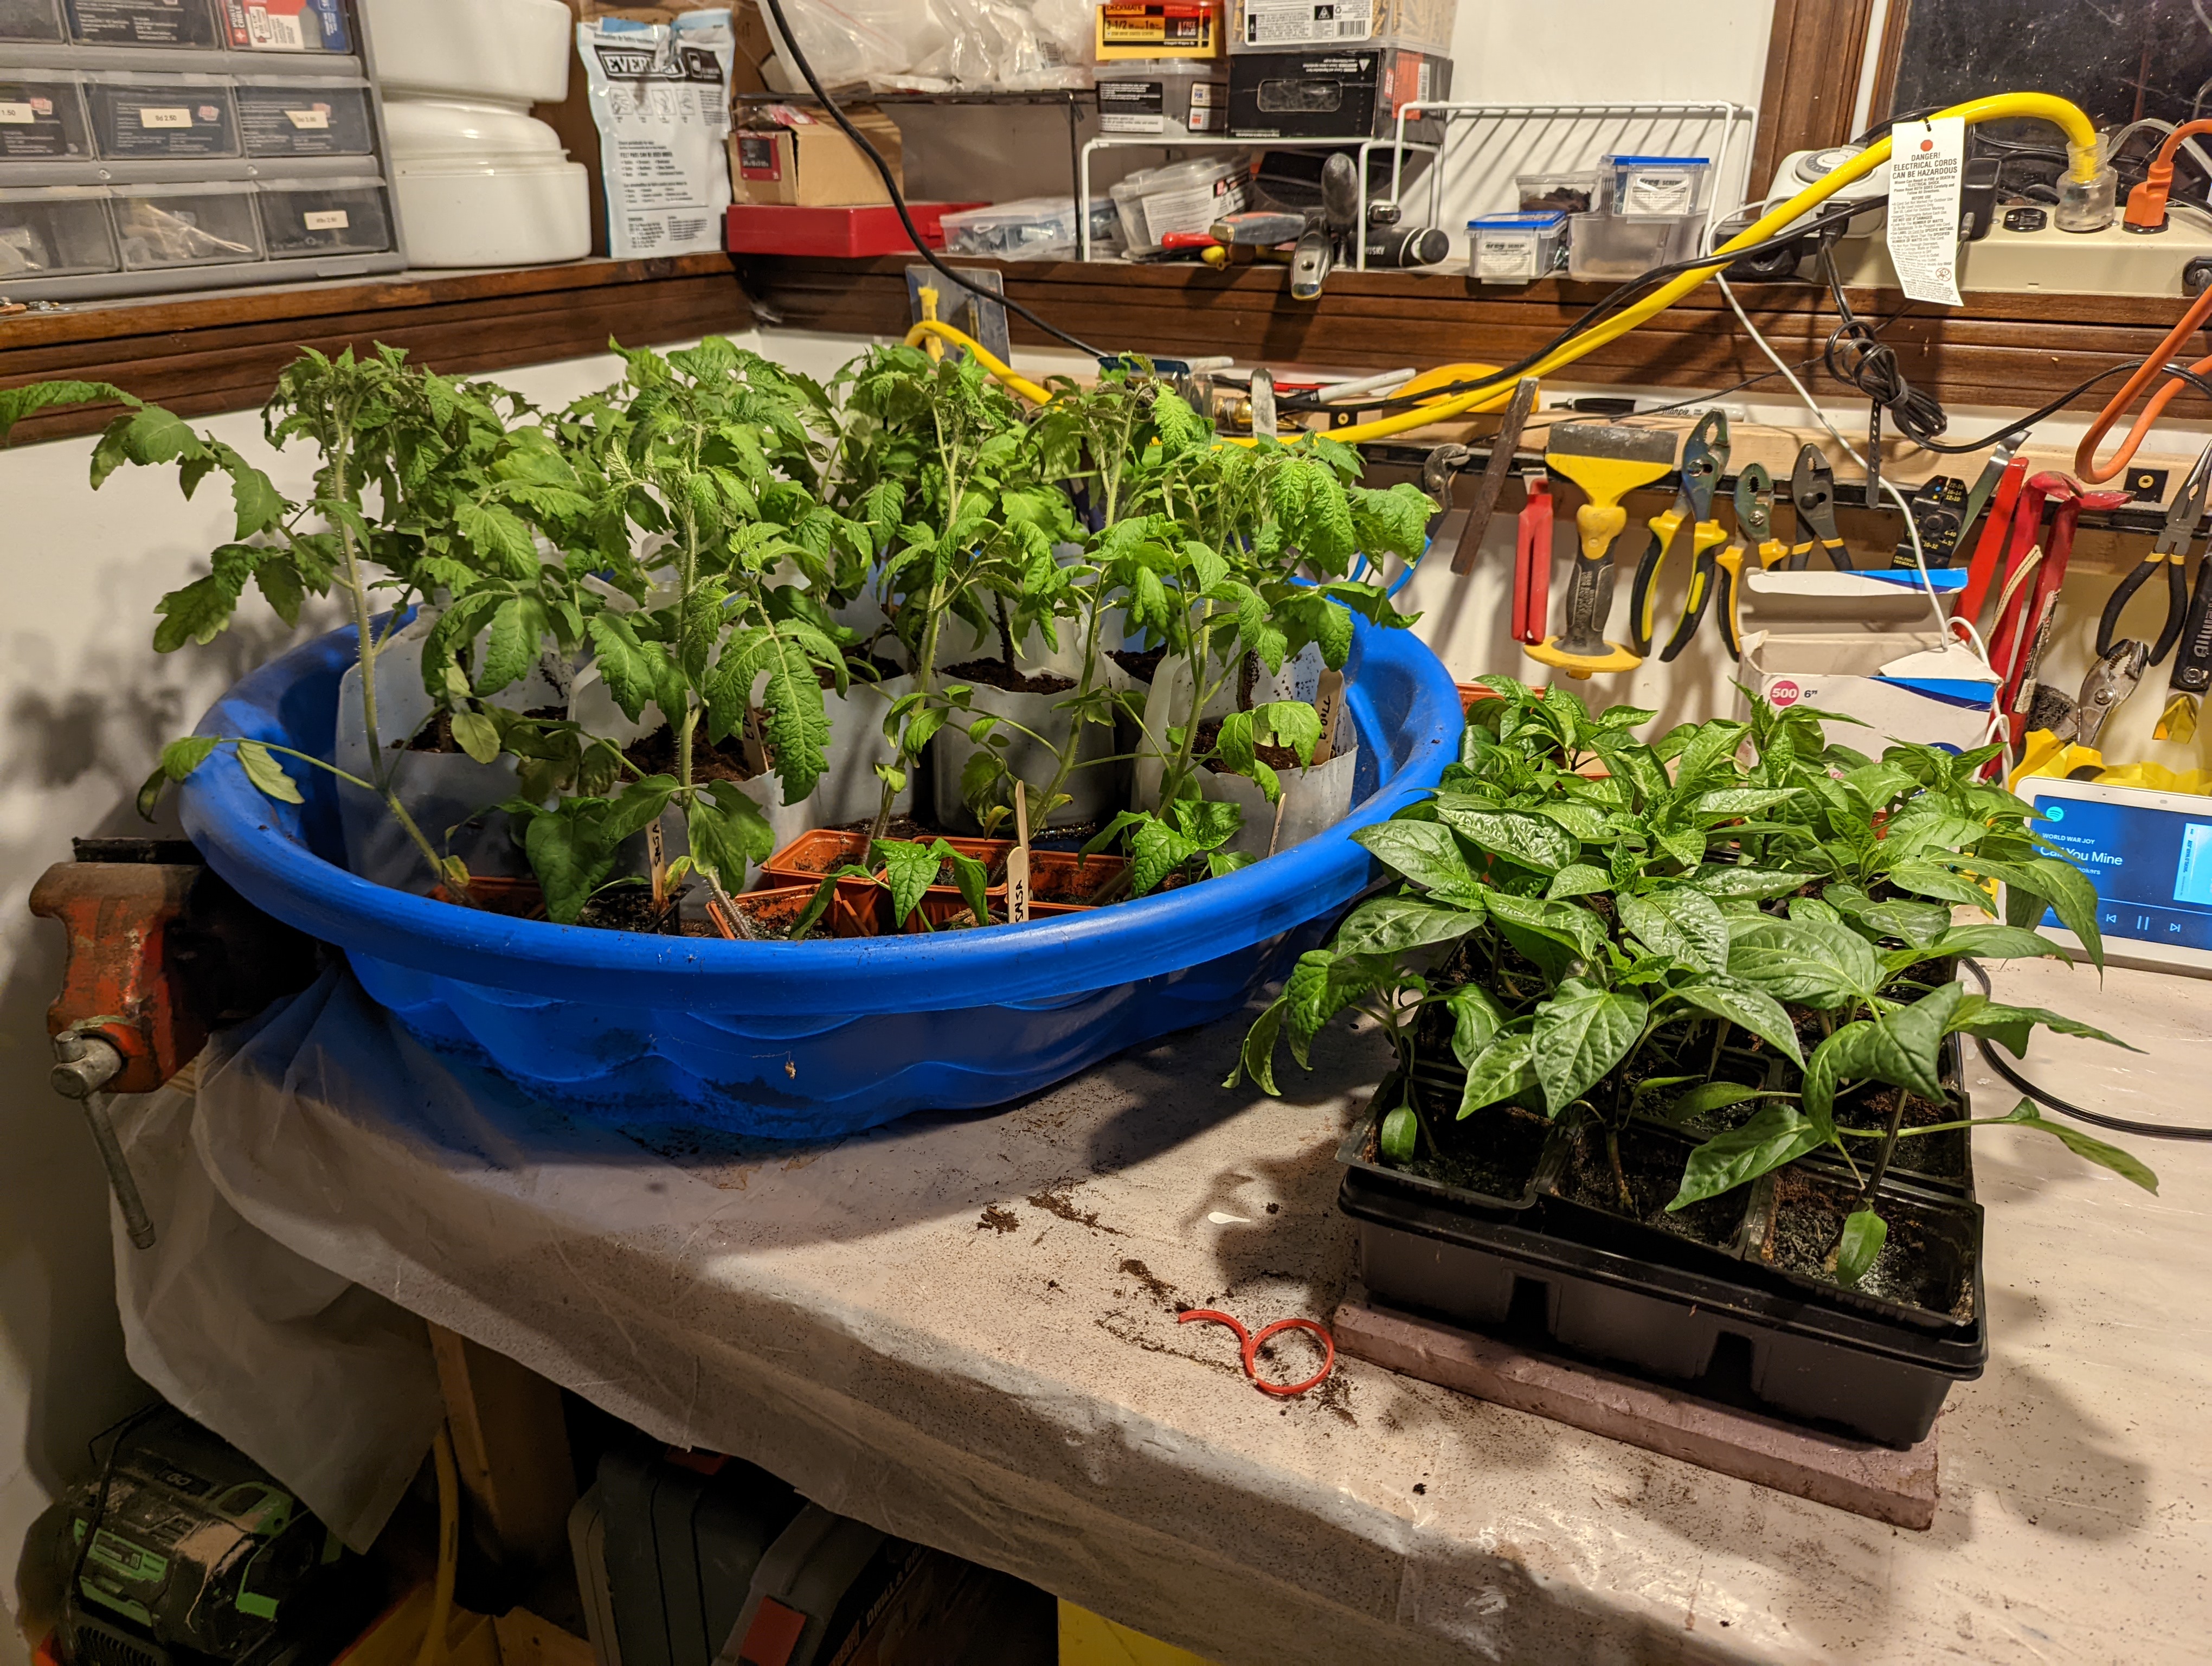 Tomato seedlings in a blue kiddie pool and pepper plants in a tray on a workbench